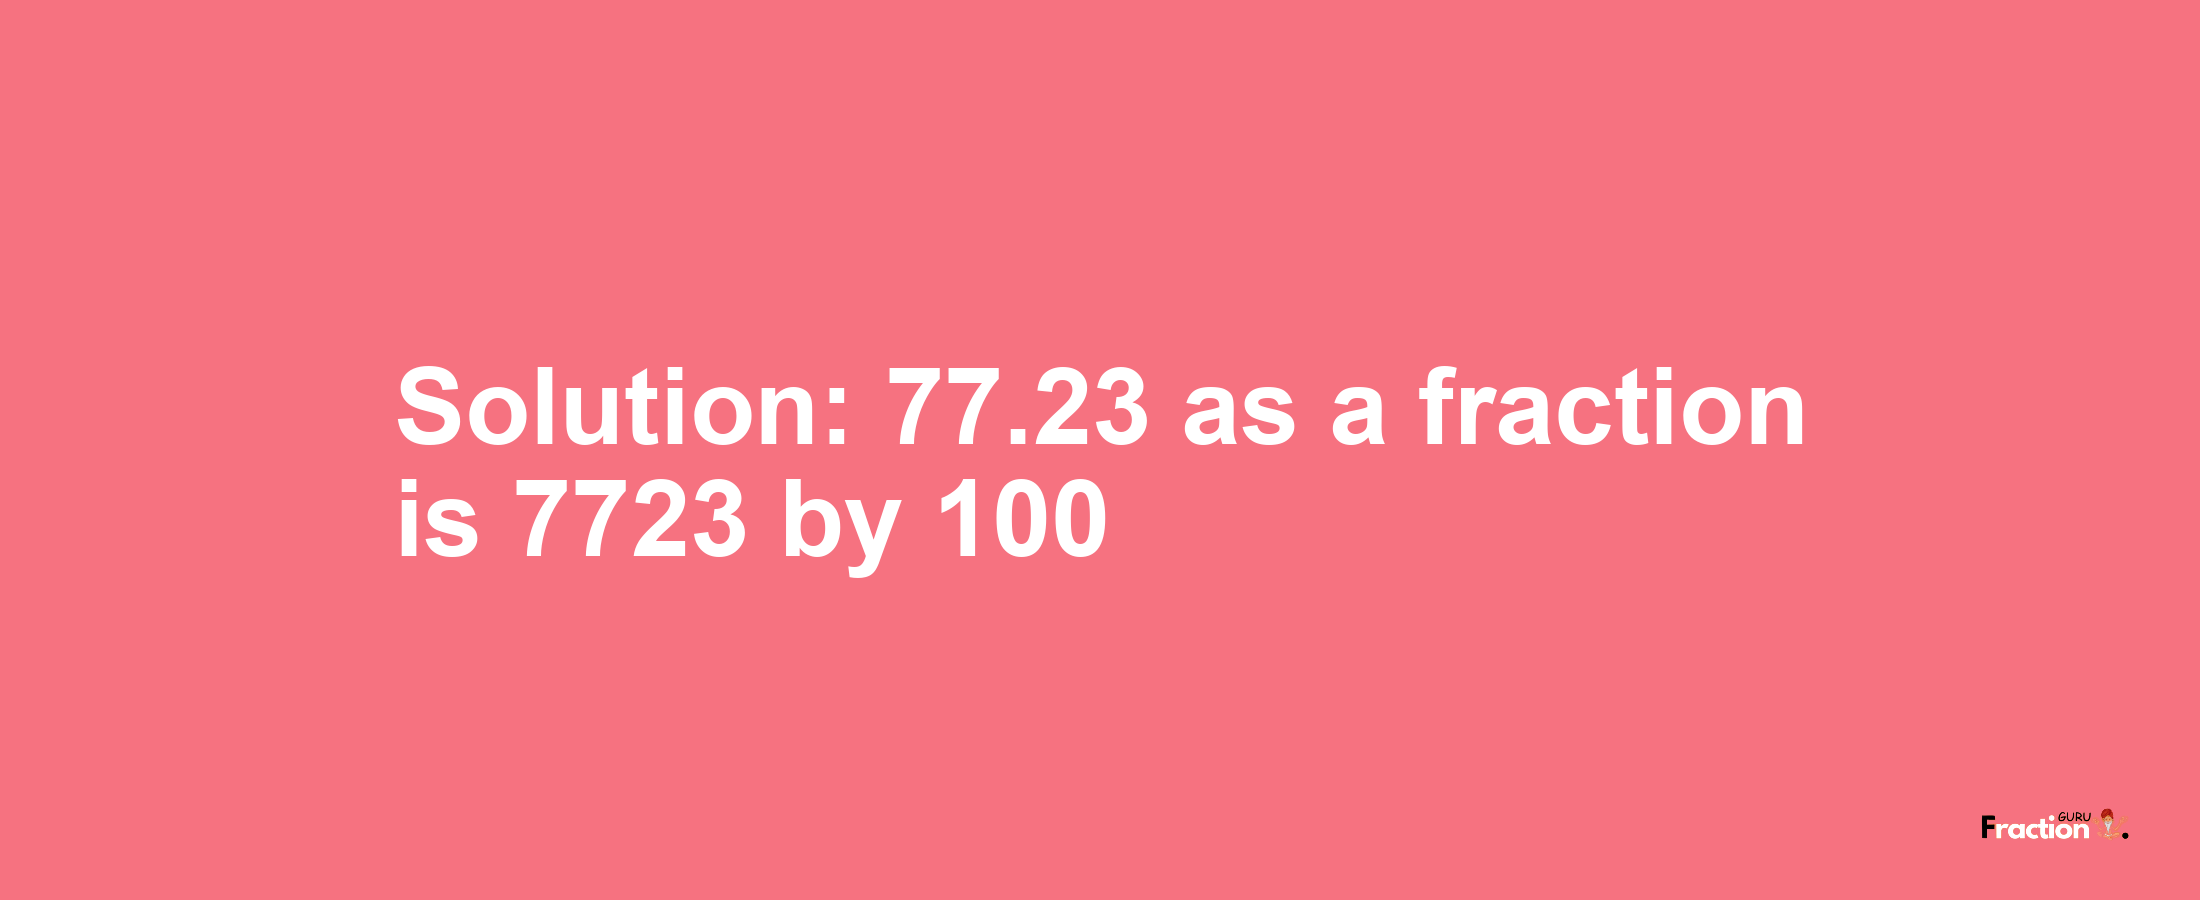 Solution:77.23 as a fraction is 7723/100